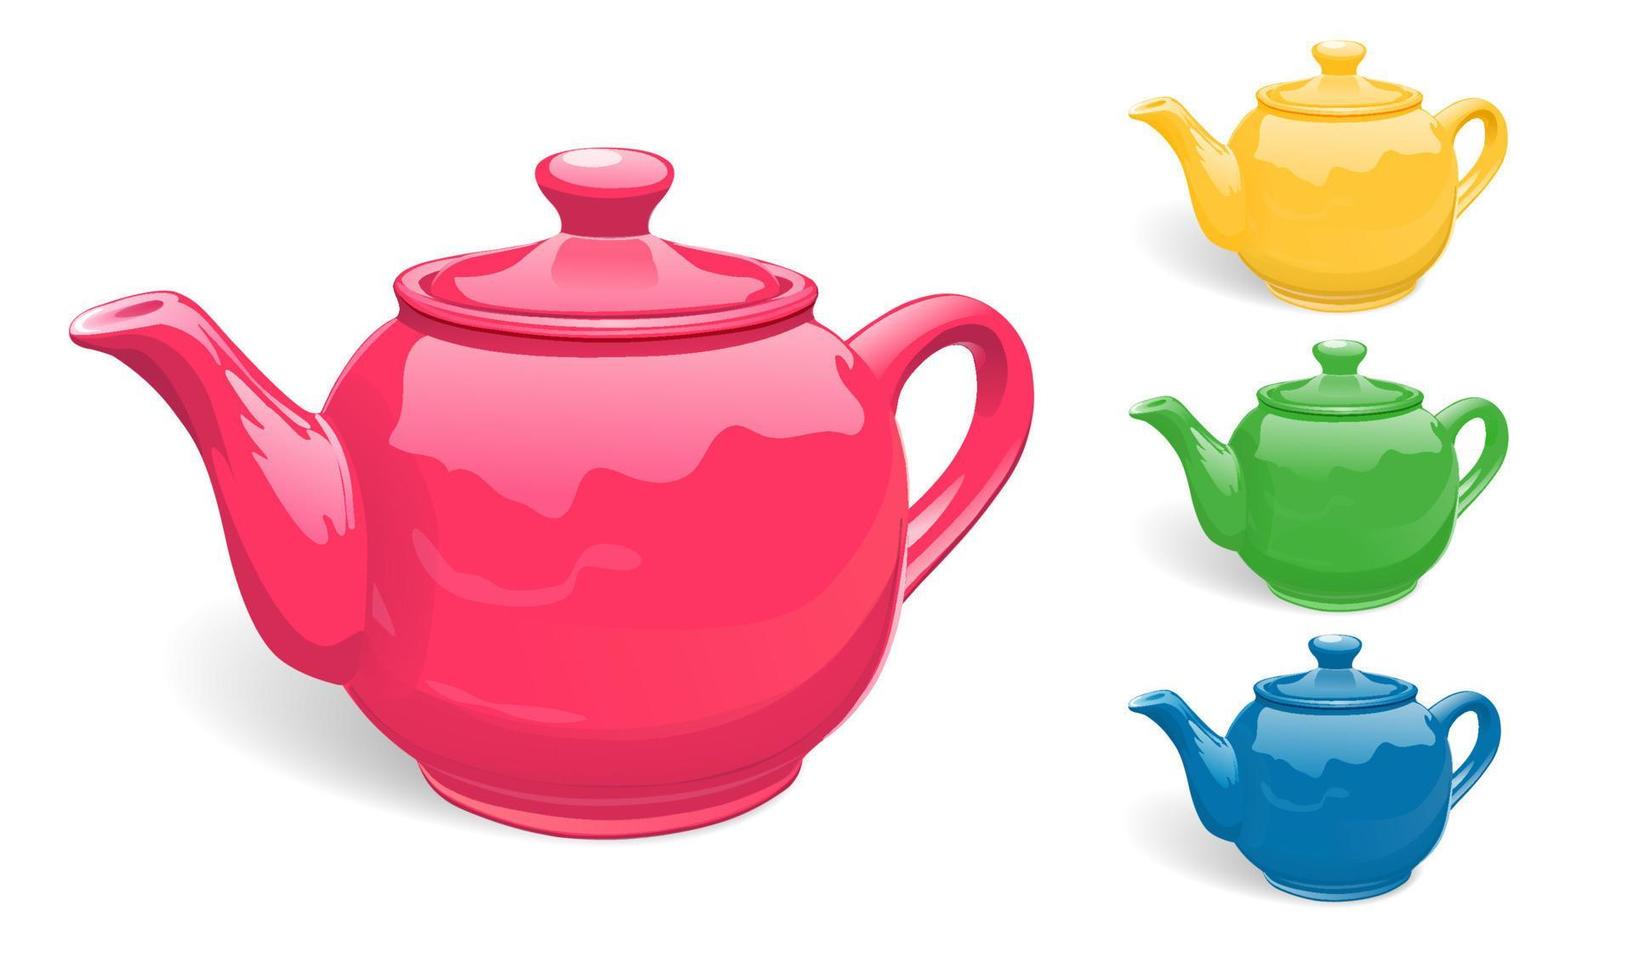 https://static.vecteezy.com/system/resources/previews/008/079/459/non_2x/teapots-for-tea-ceramic-in-different-colors-a-set-of-kitchen-utensils-a-realistic-image-isolated-on-white-background-image-vector.jpg